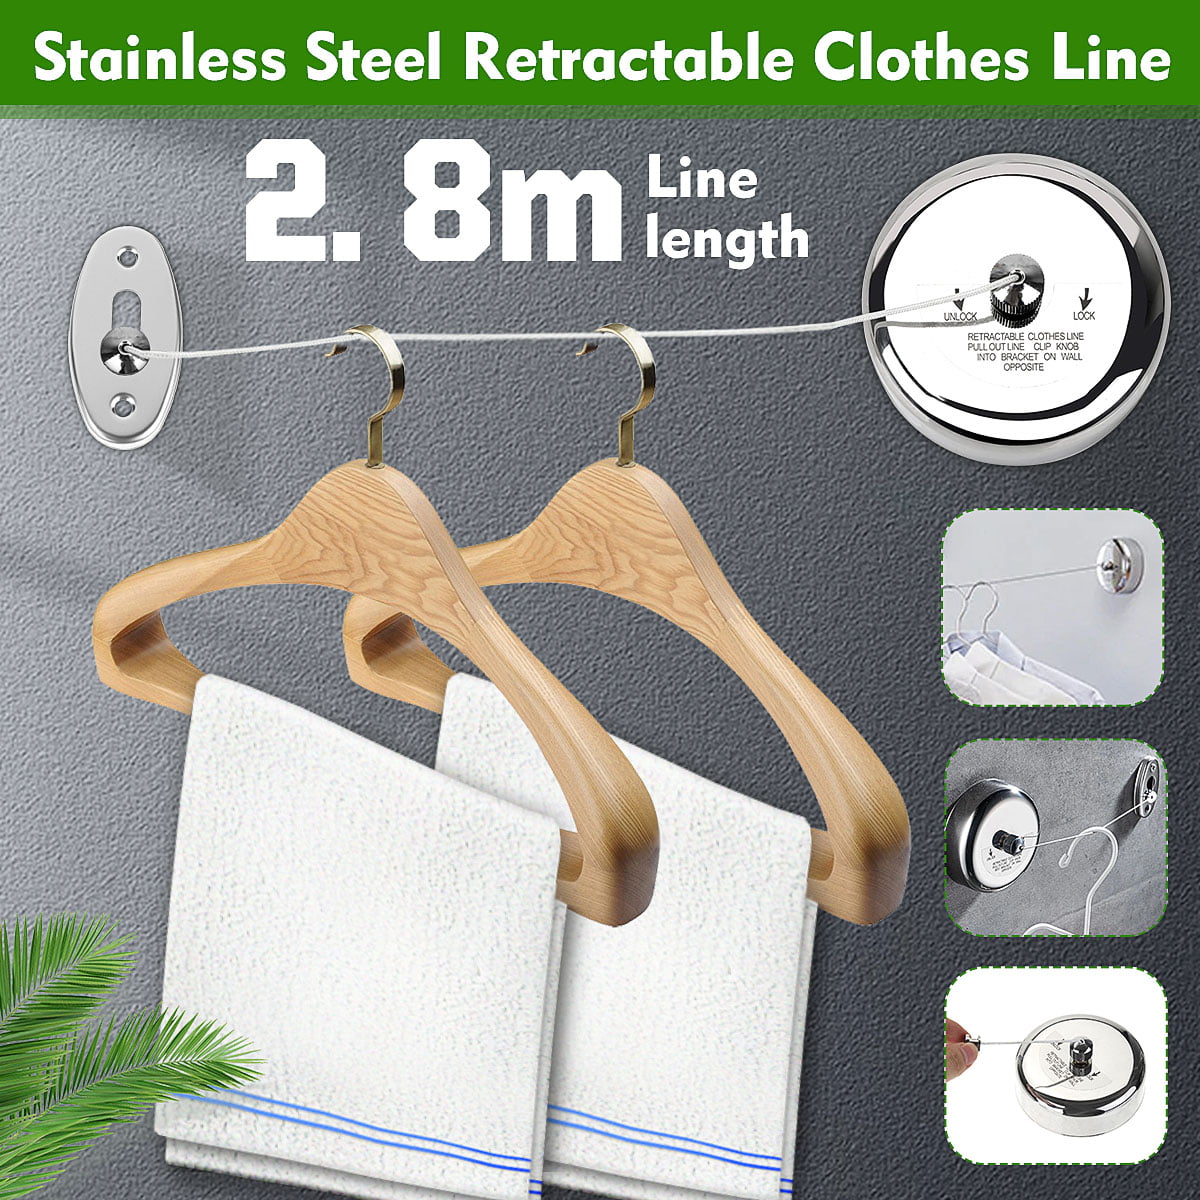 Retractable Stainless Steel Clothesline Cloth String Rope Bathroom Drying Rack 